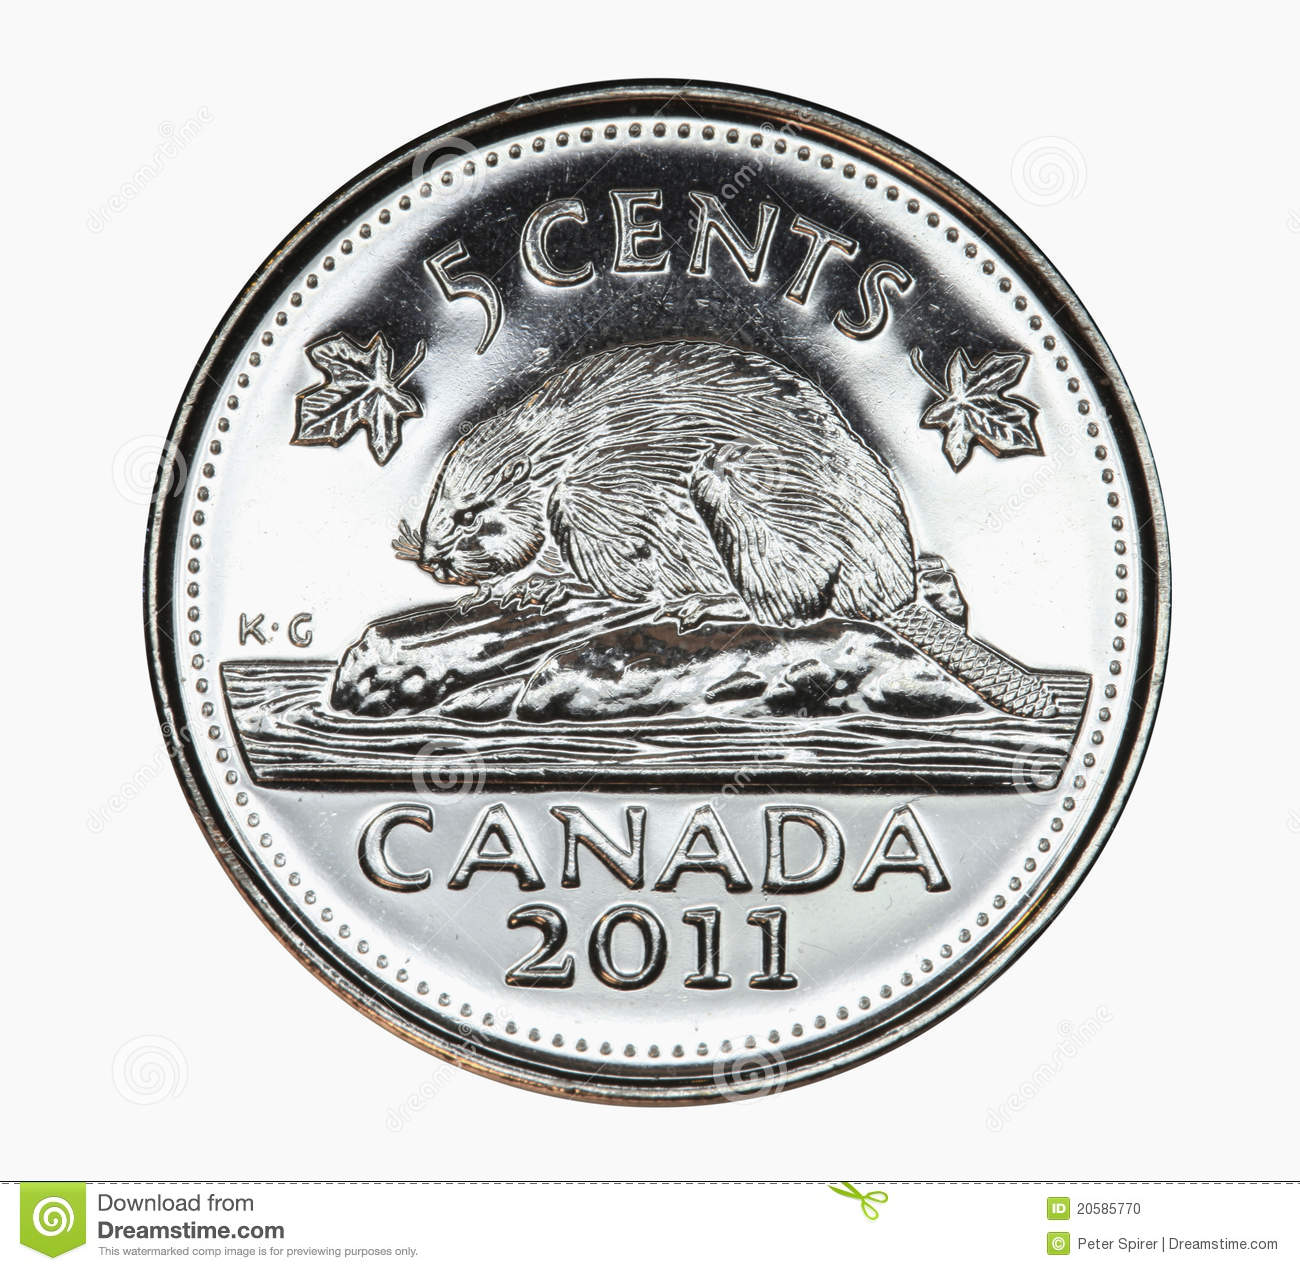 The Canadian Five Cent Coin Depicts The National Animal The